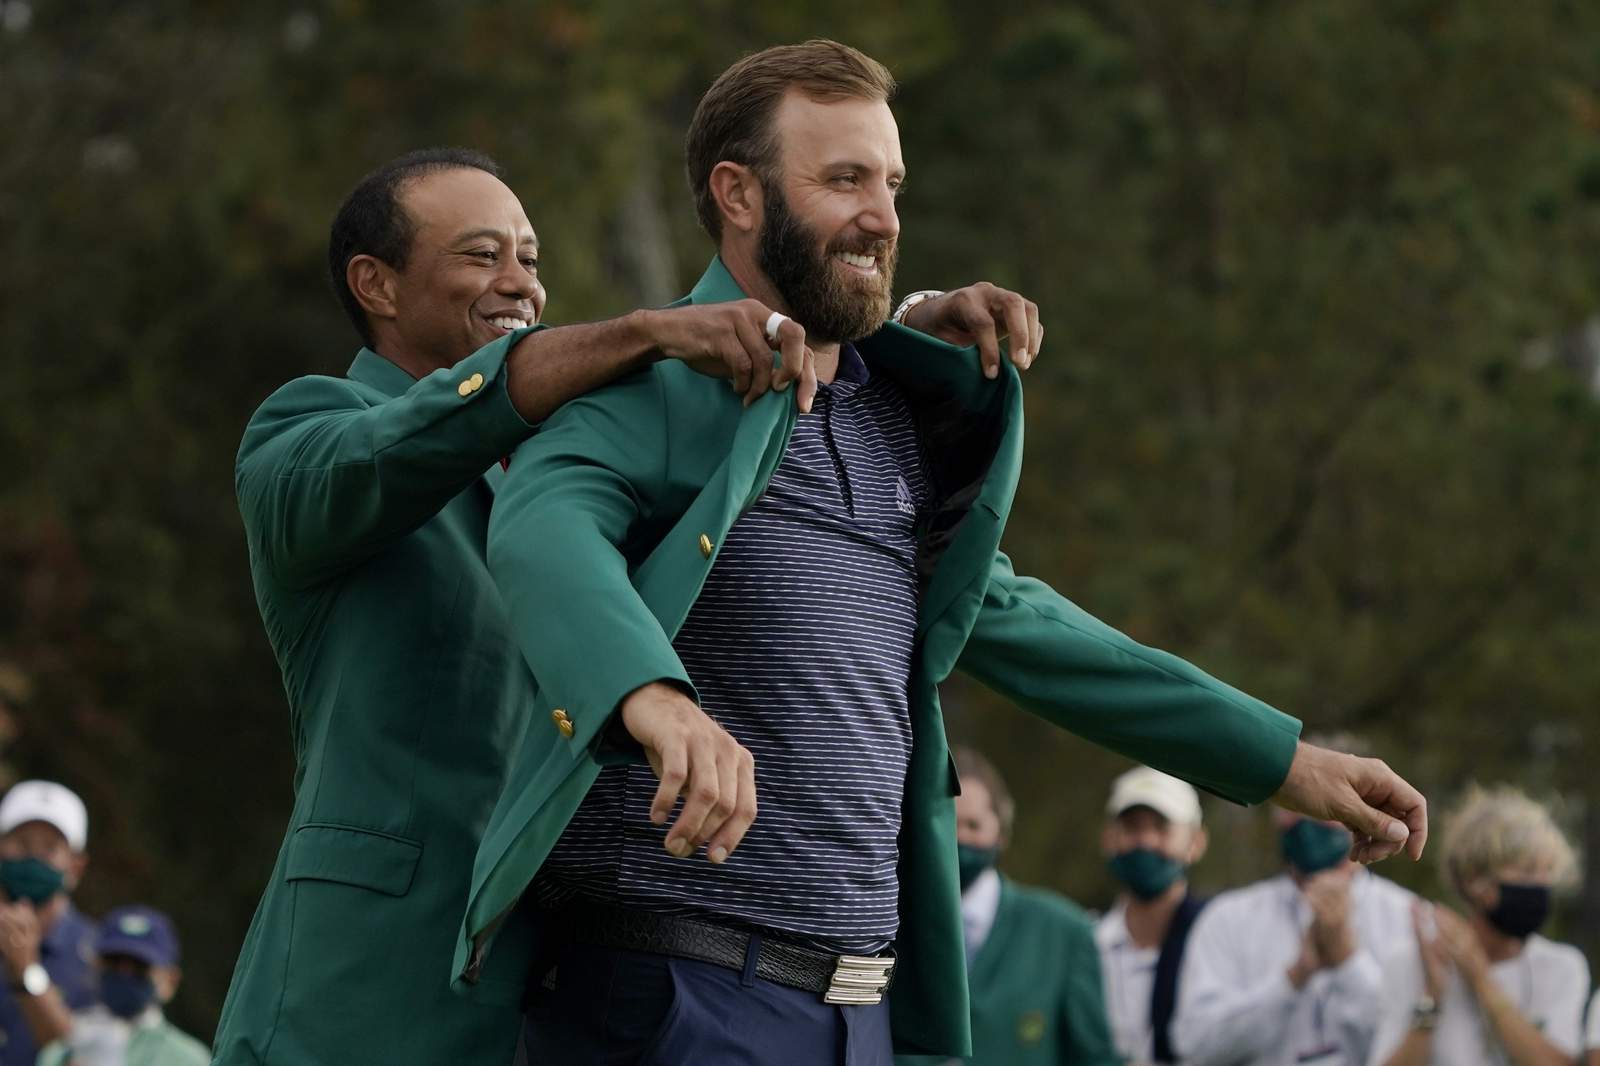 Five months later, measure of normalcy at Masters in April